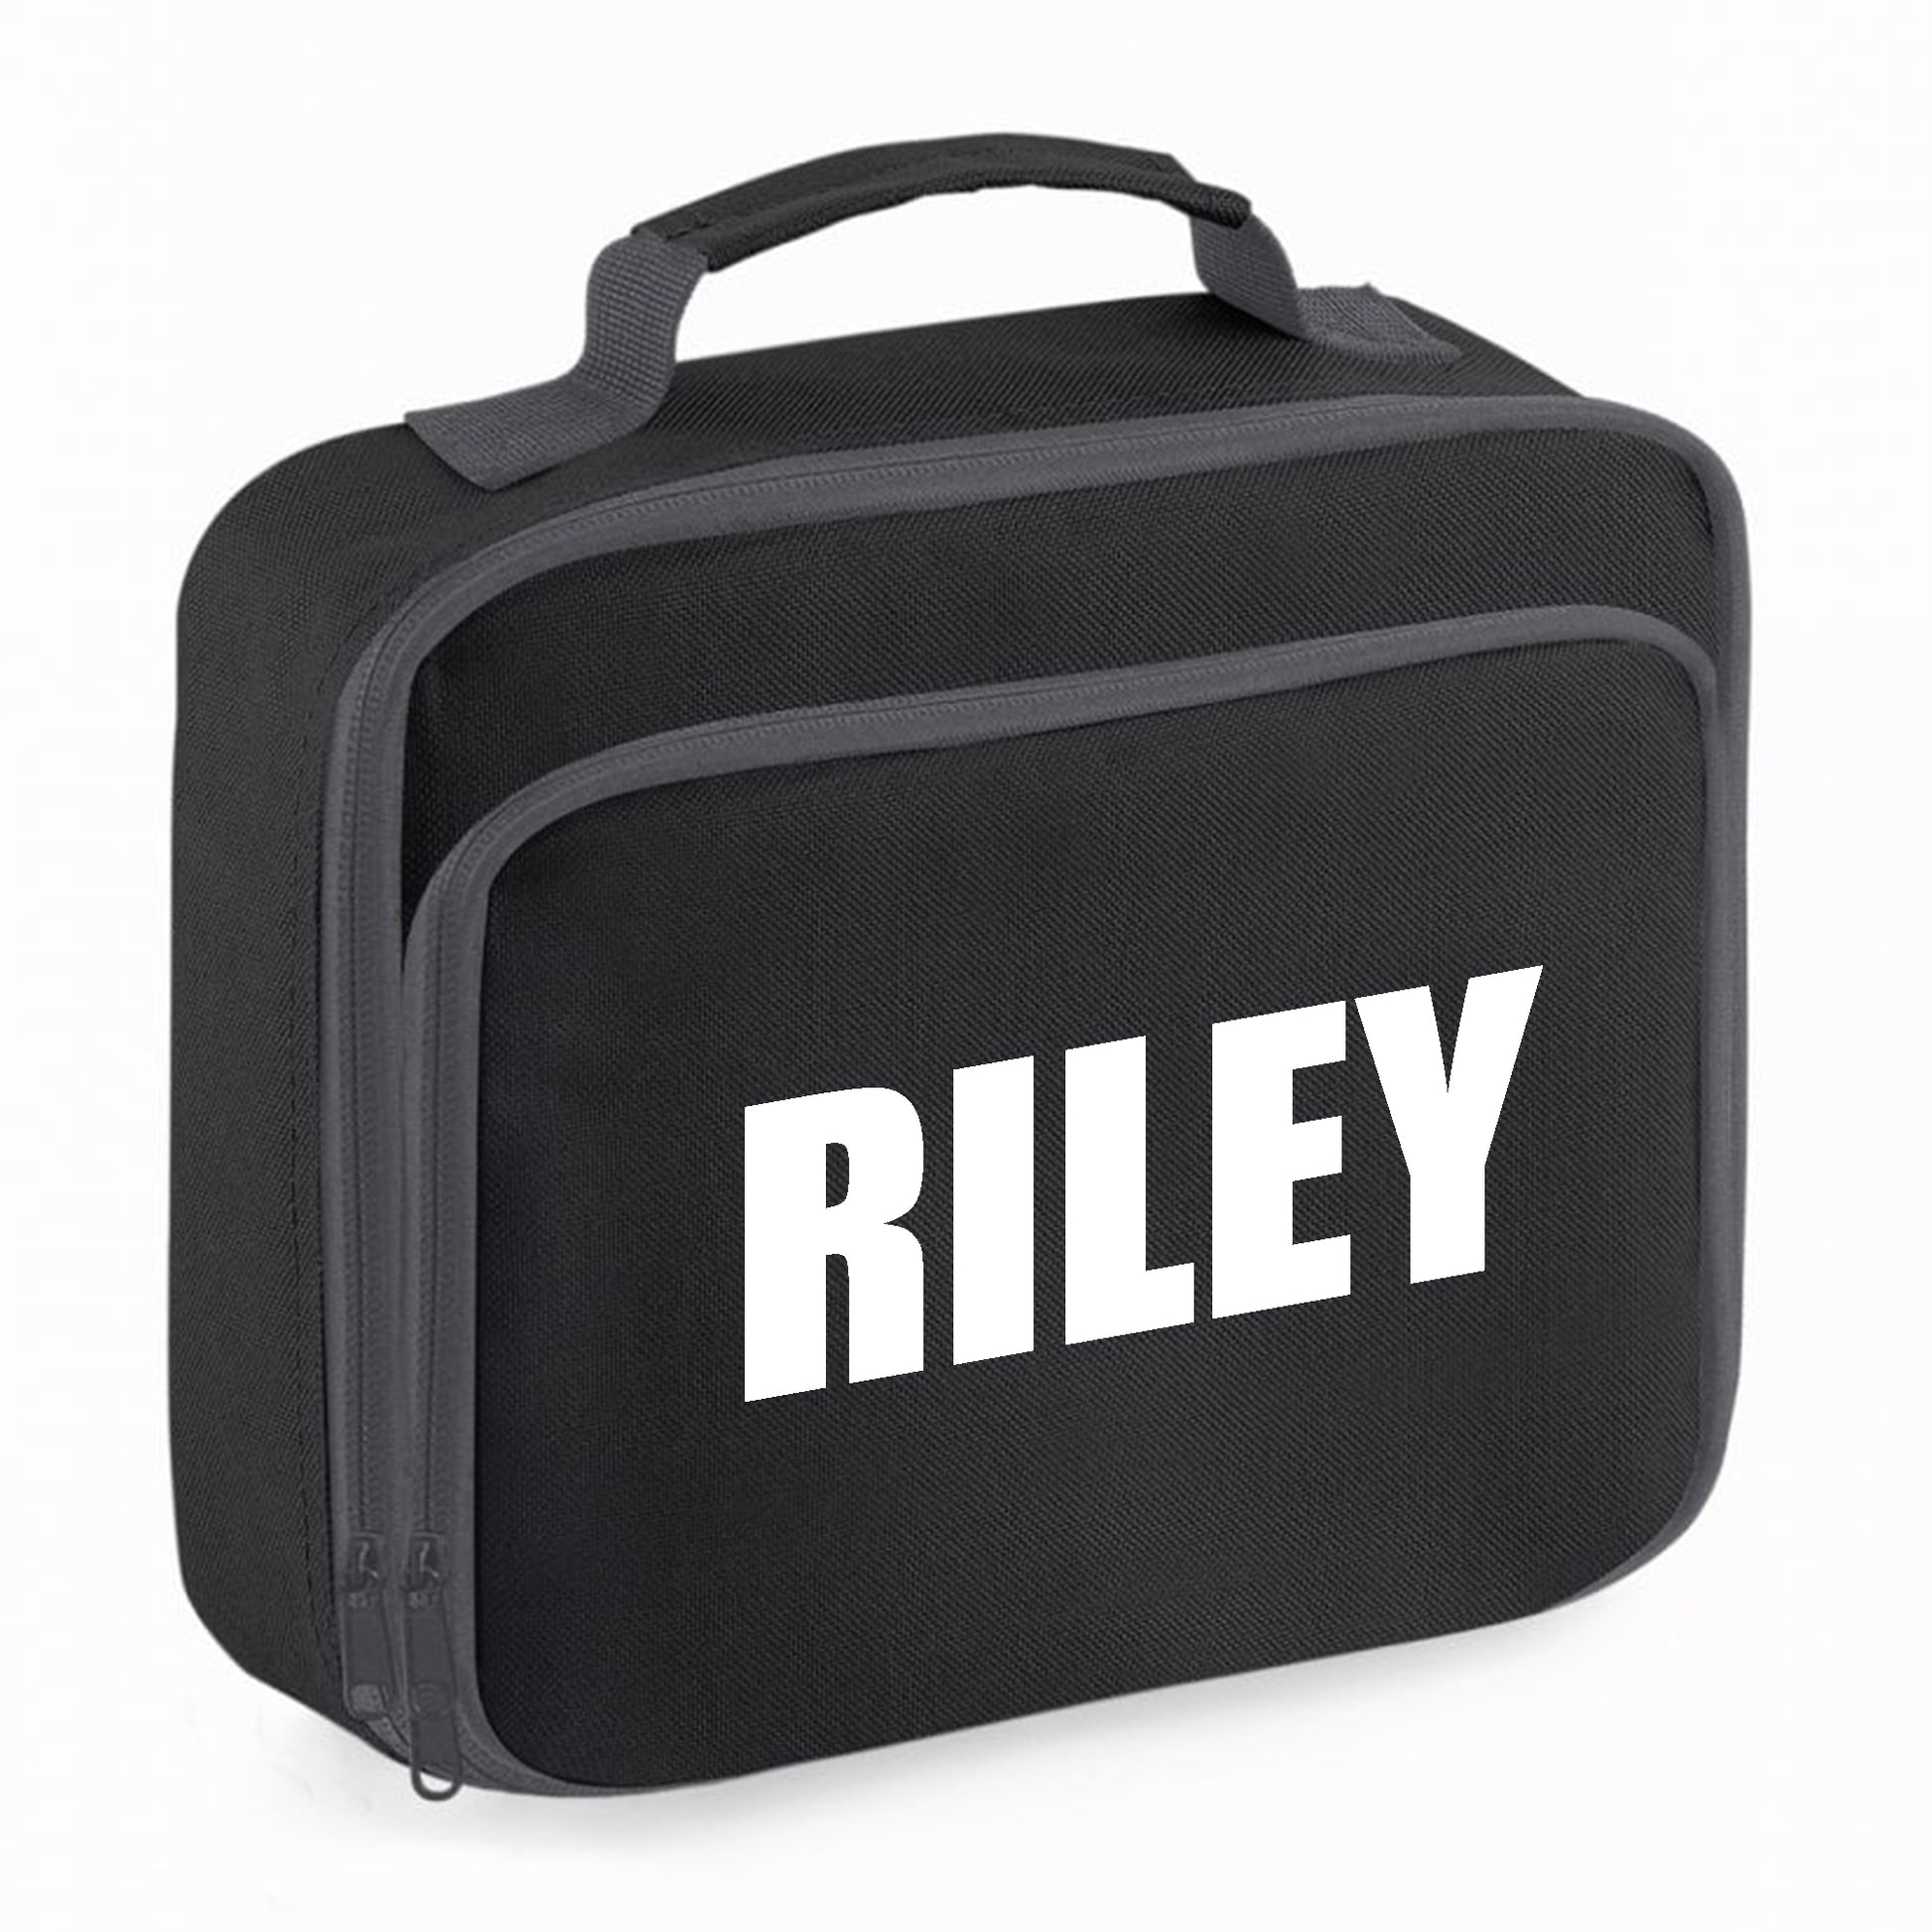 A personalised custom name childrens lunch box cooler bag.